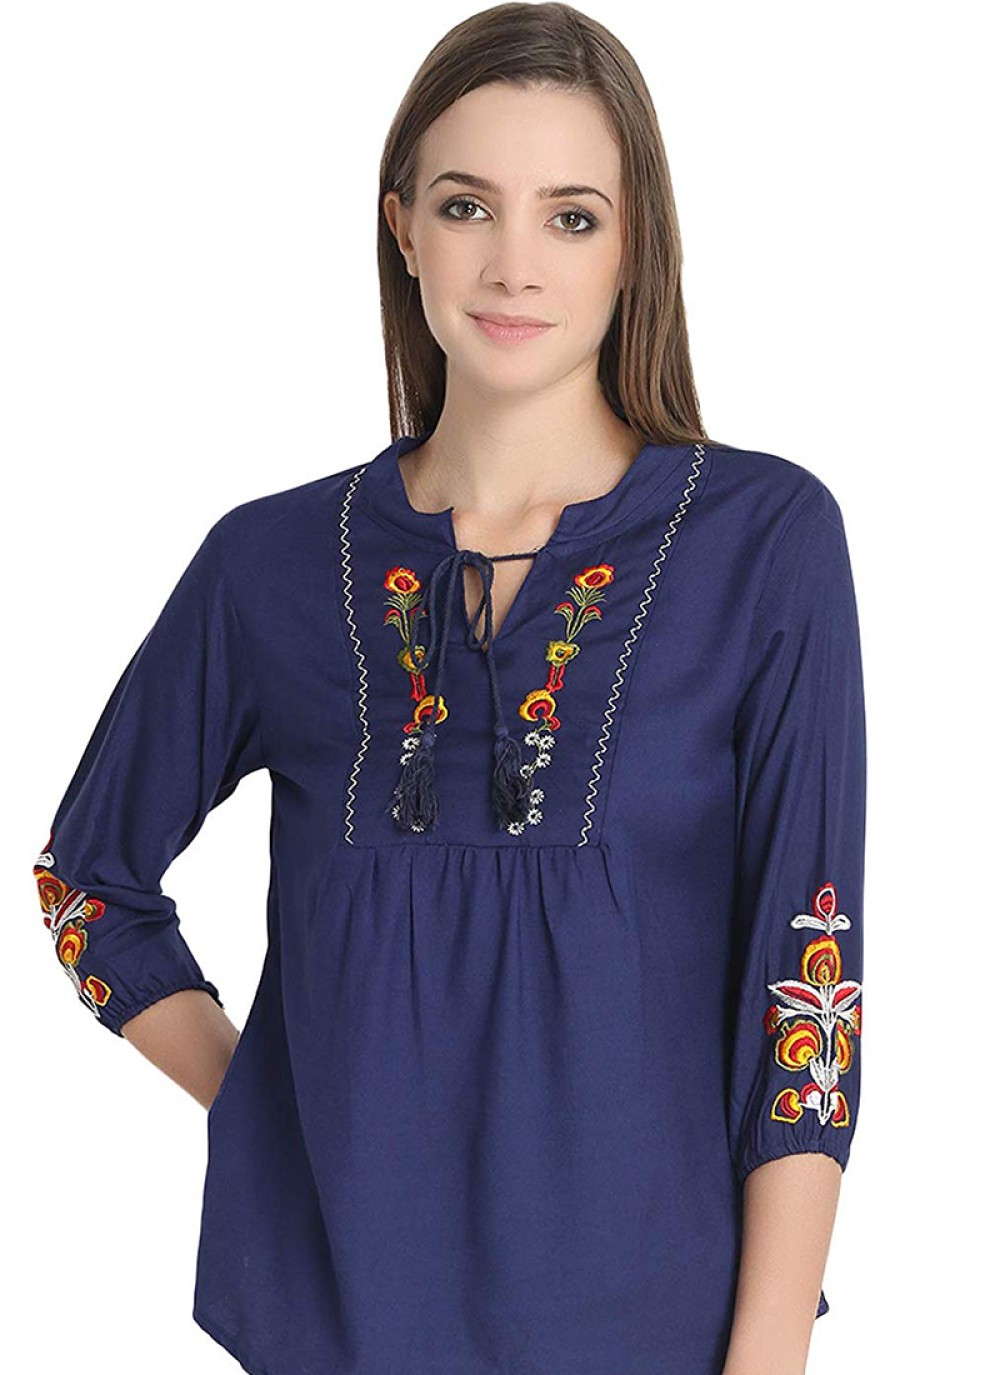 Navy Blue Party Casual Kurti